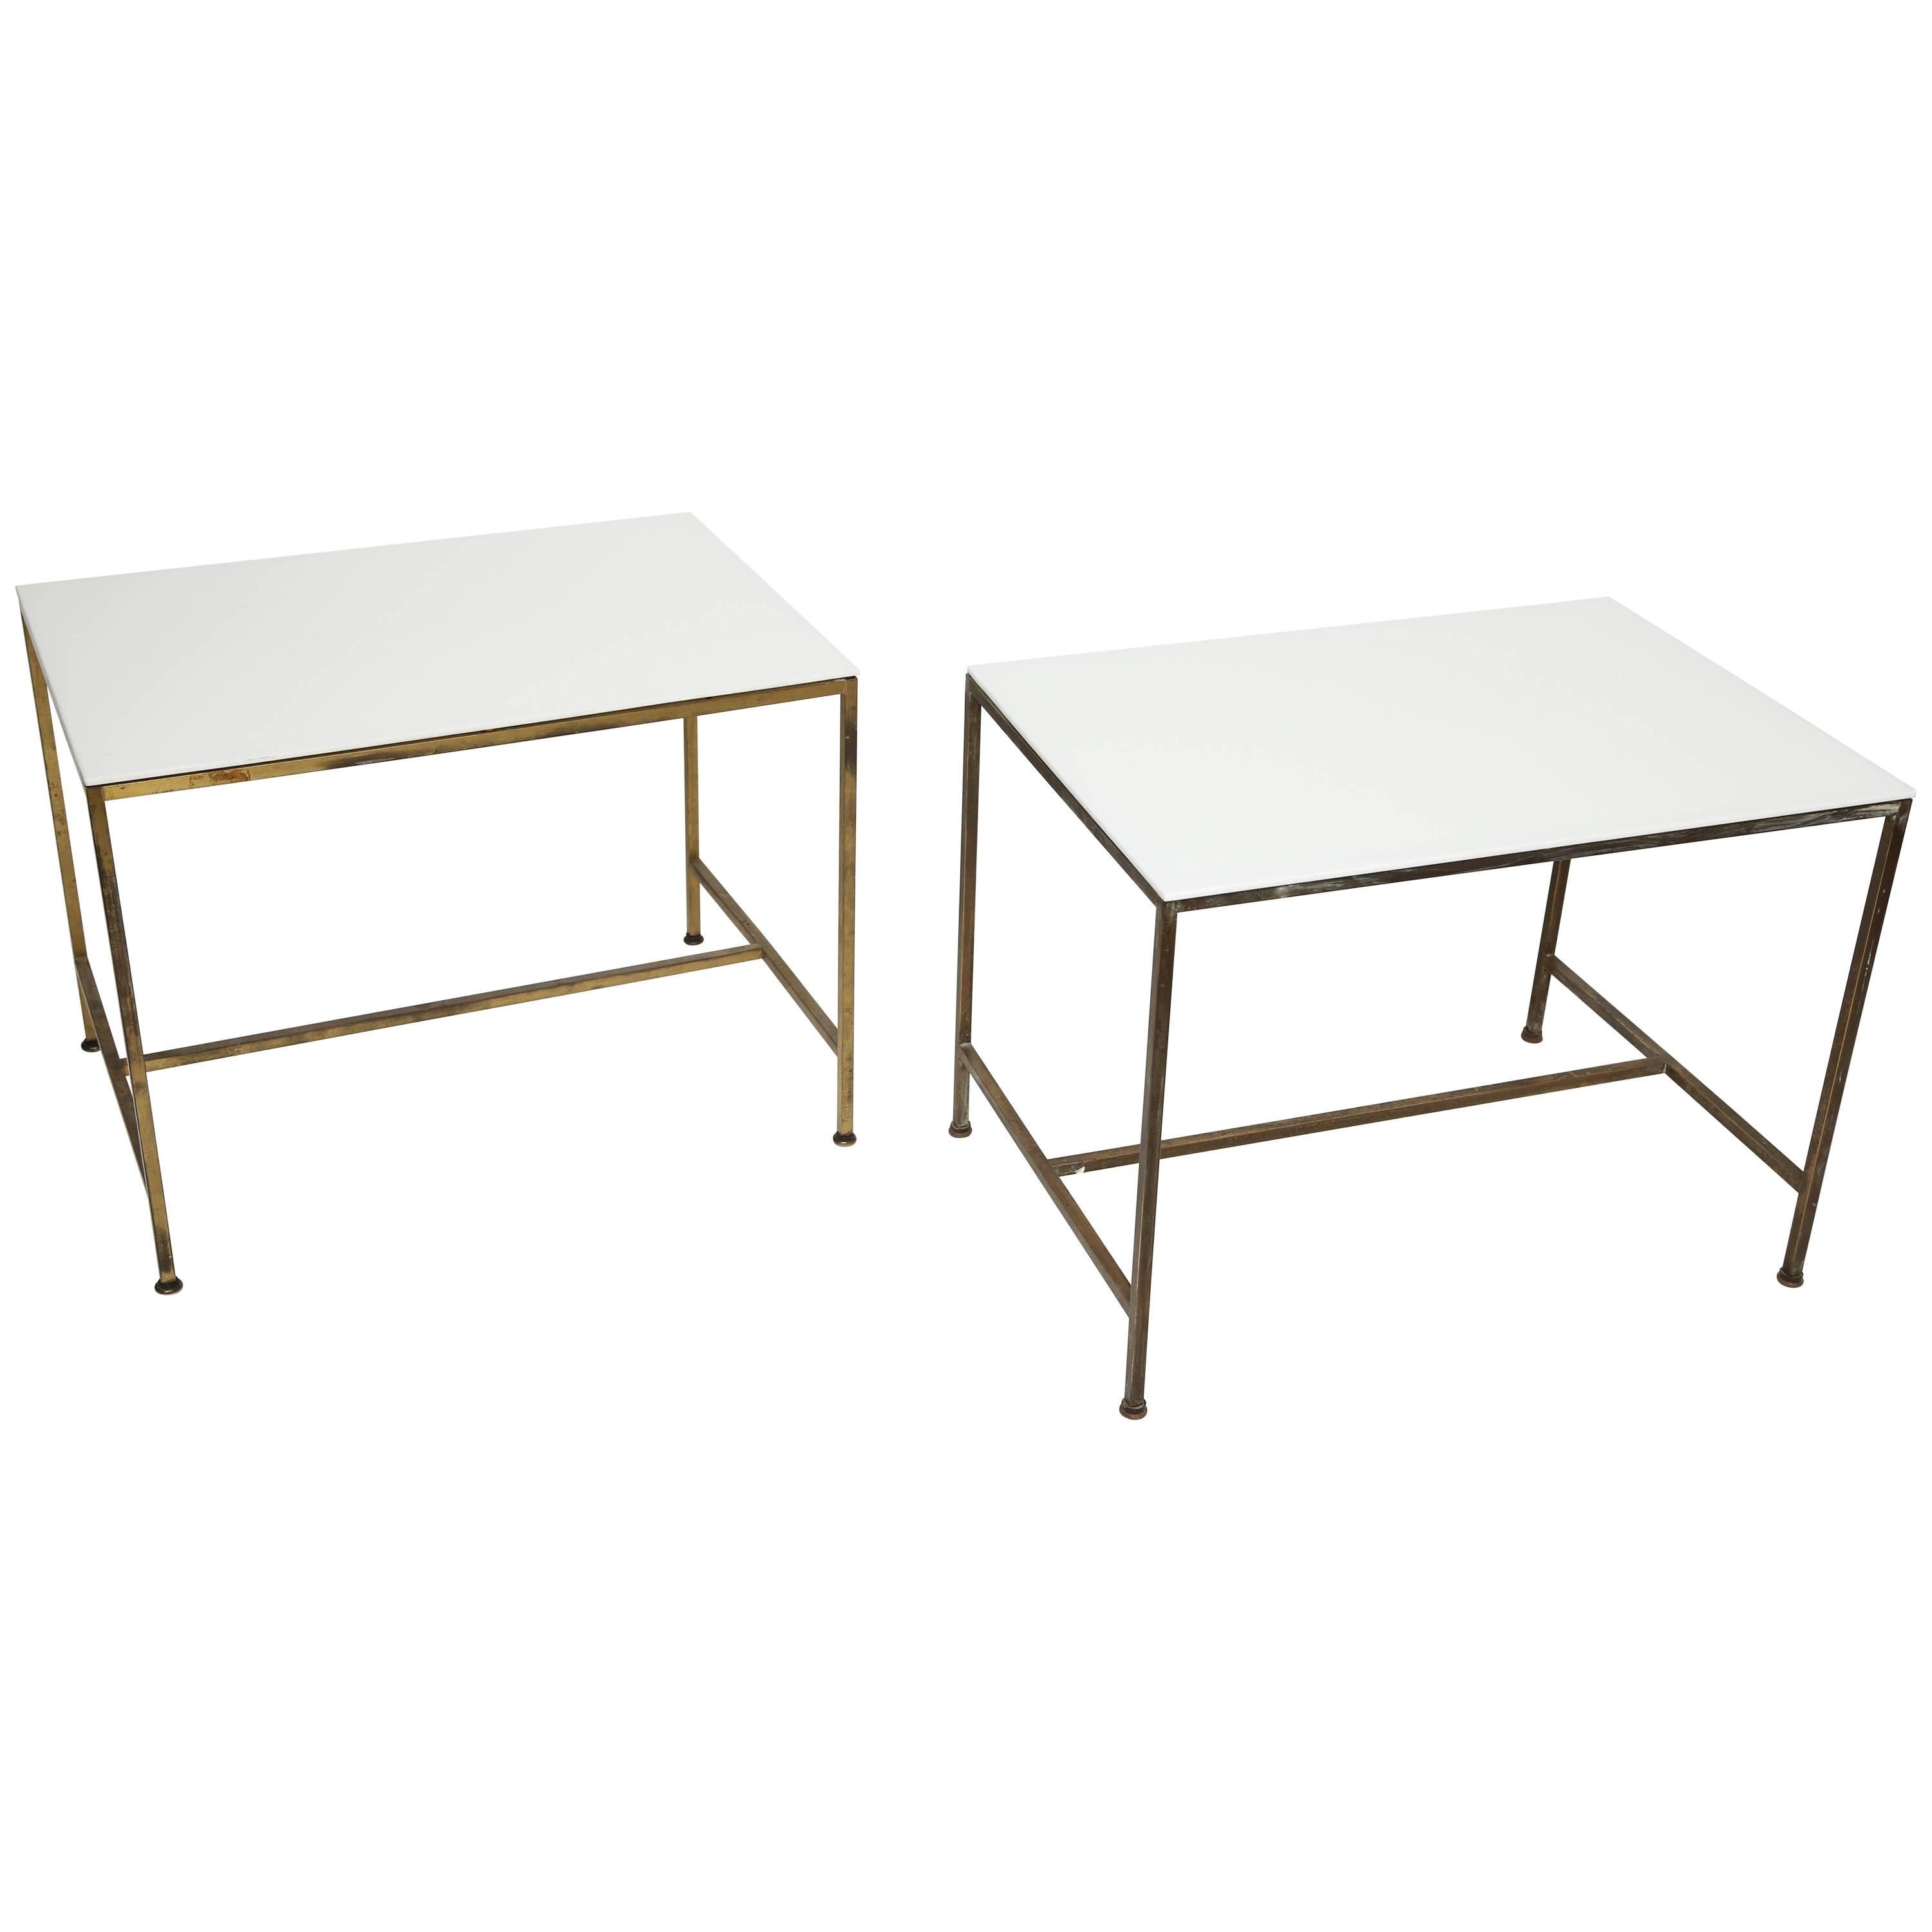 Paul Mccobb Directional Glass Tables For Sale